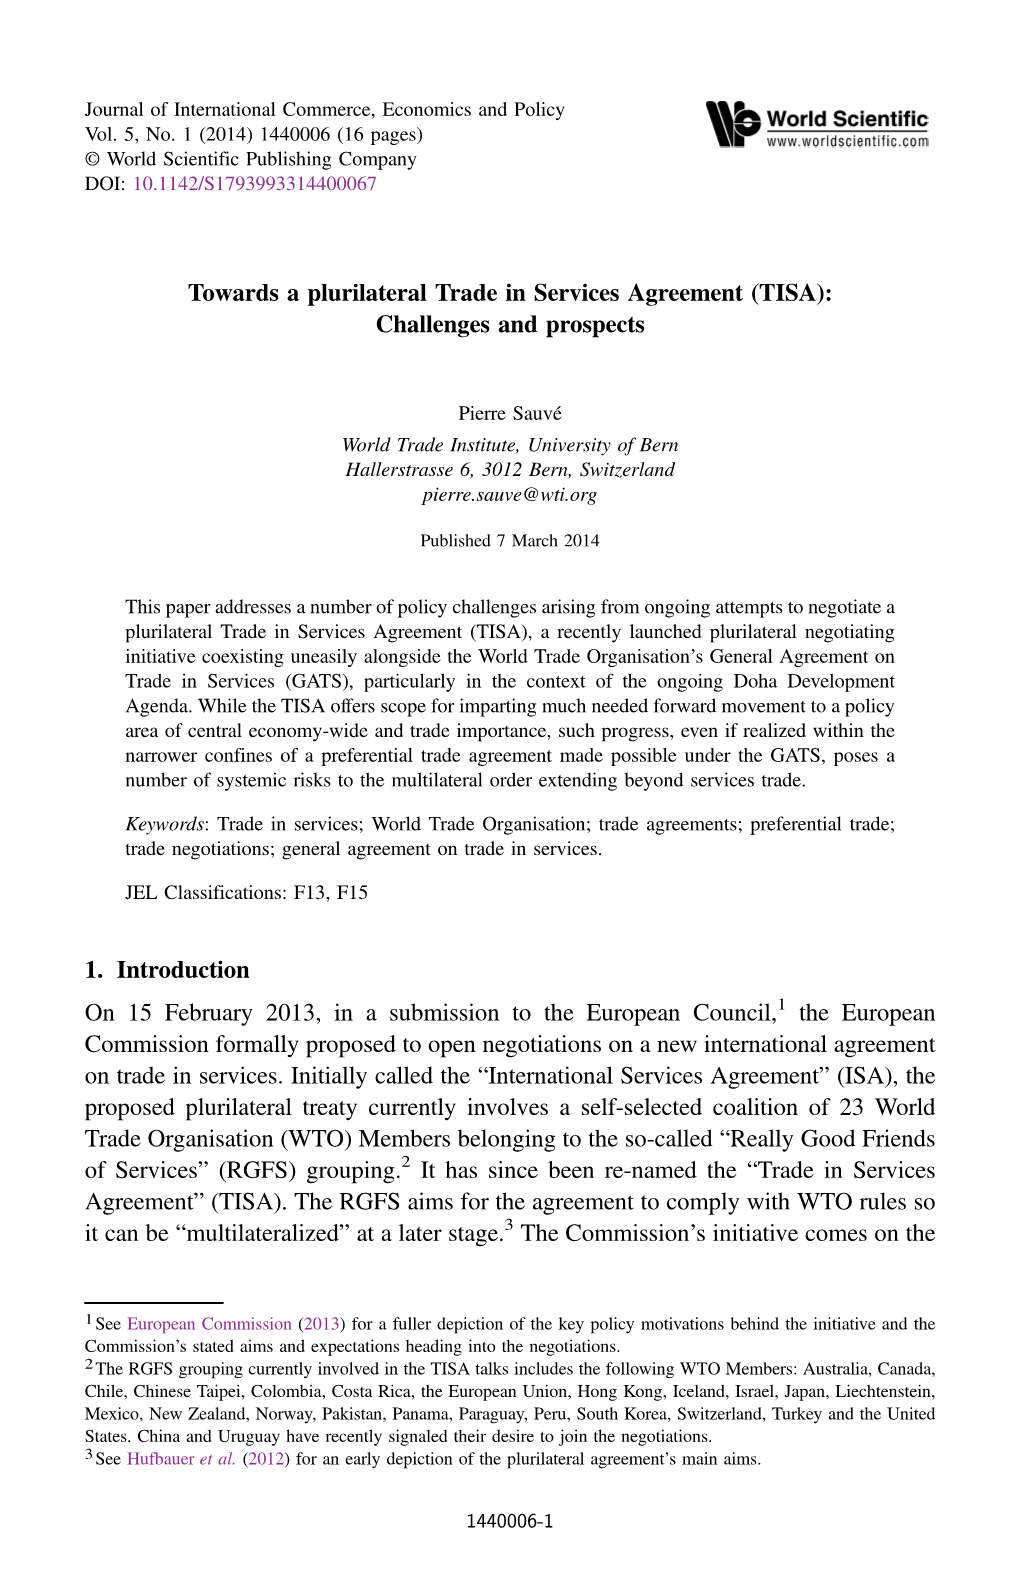 Towards a Plurilateral Trade in Services Agreement (TISA): Challenges and Prospects